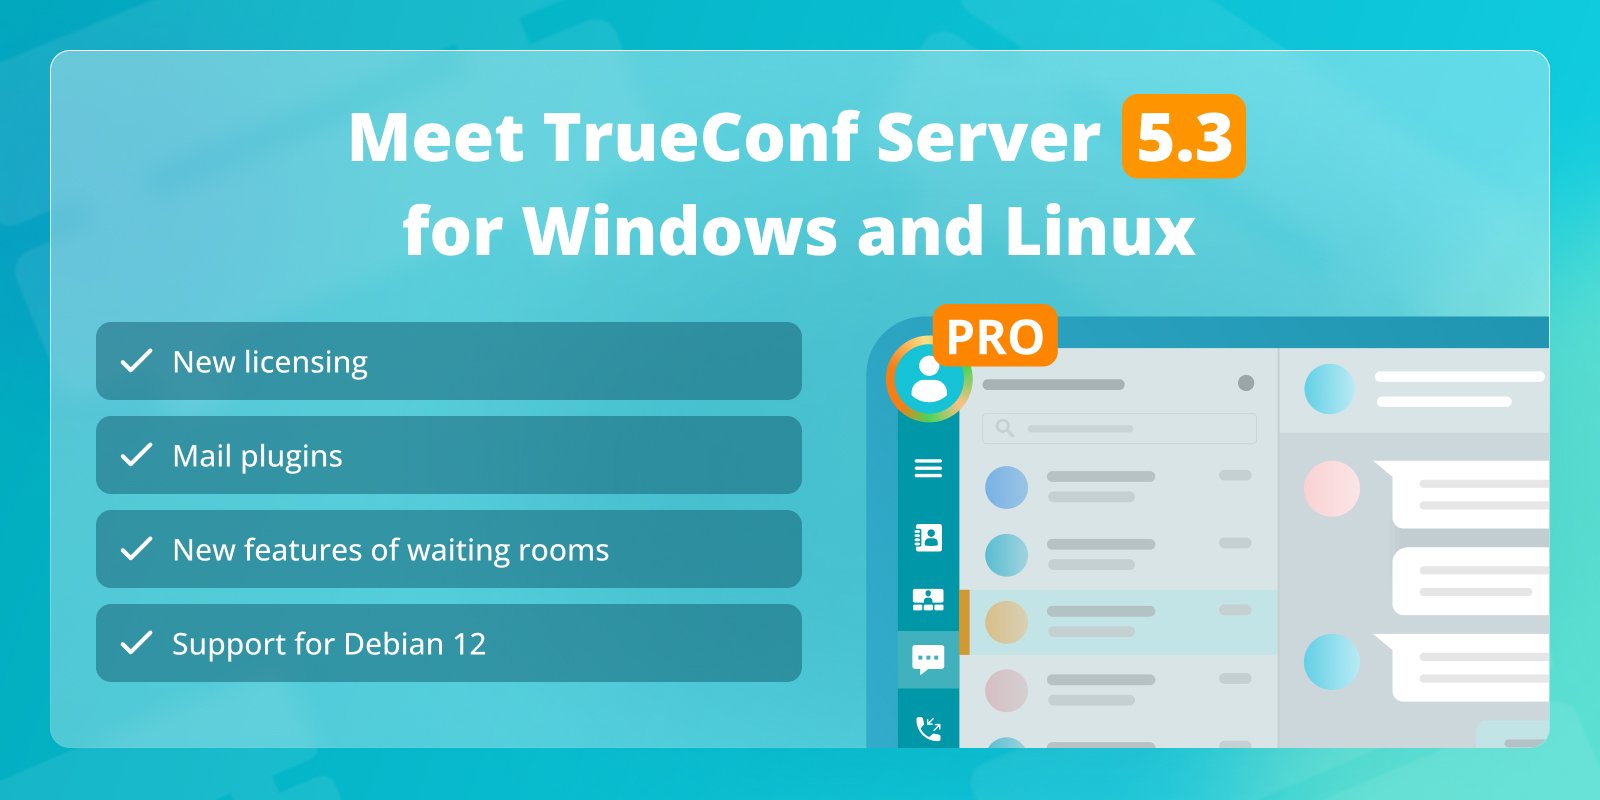 TrueConf Server 5.3 major update: new licensing, mail plugins, and support for Debian 12 4